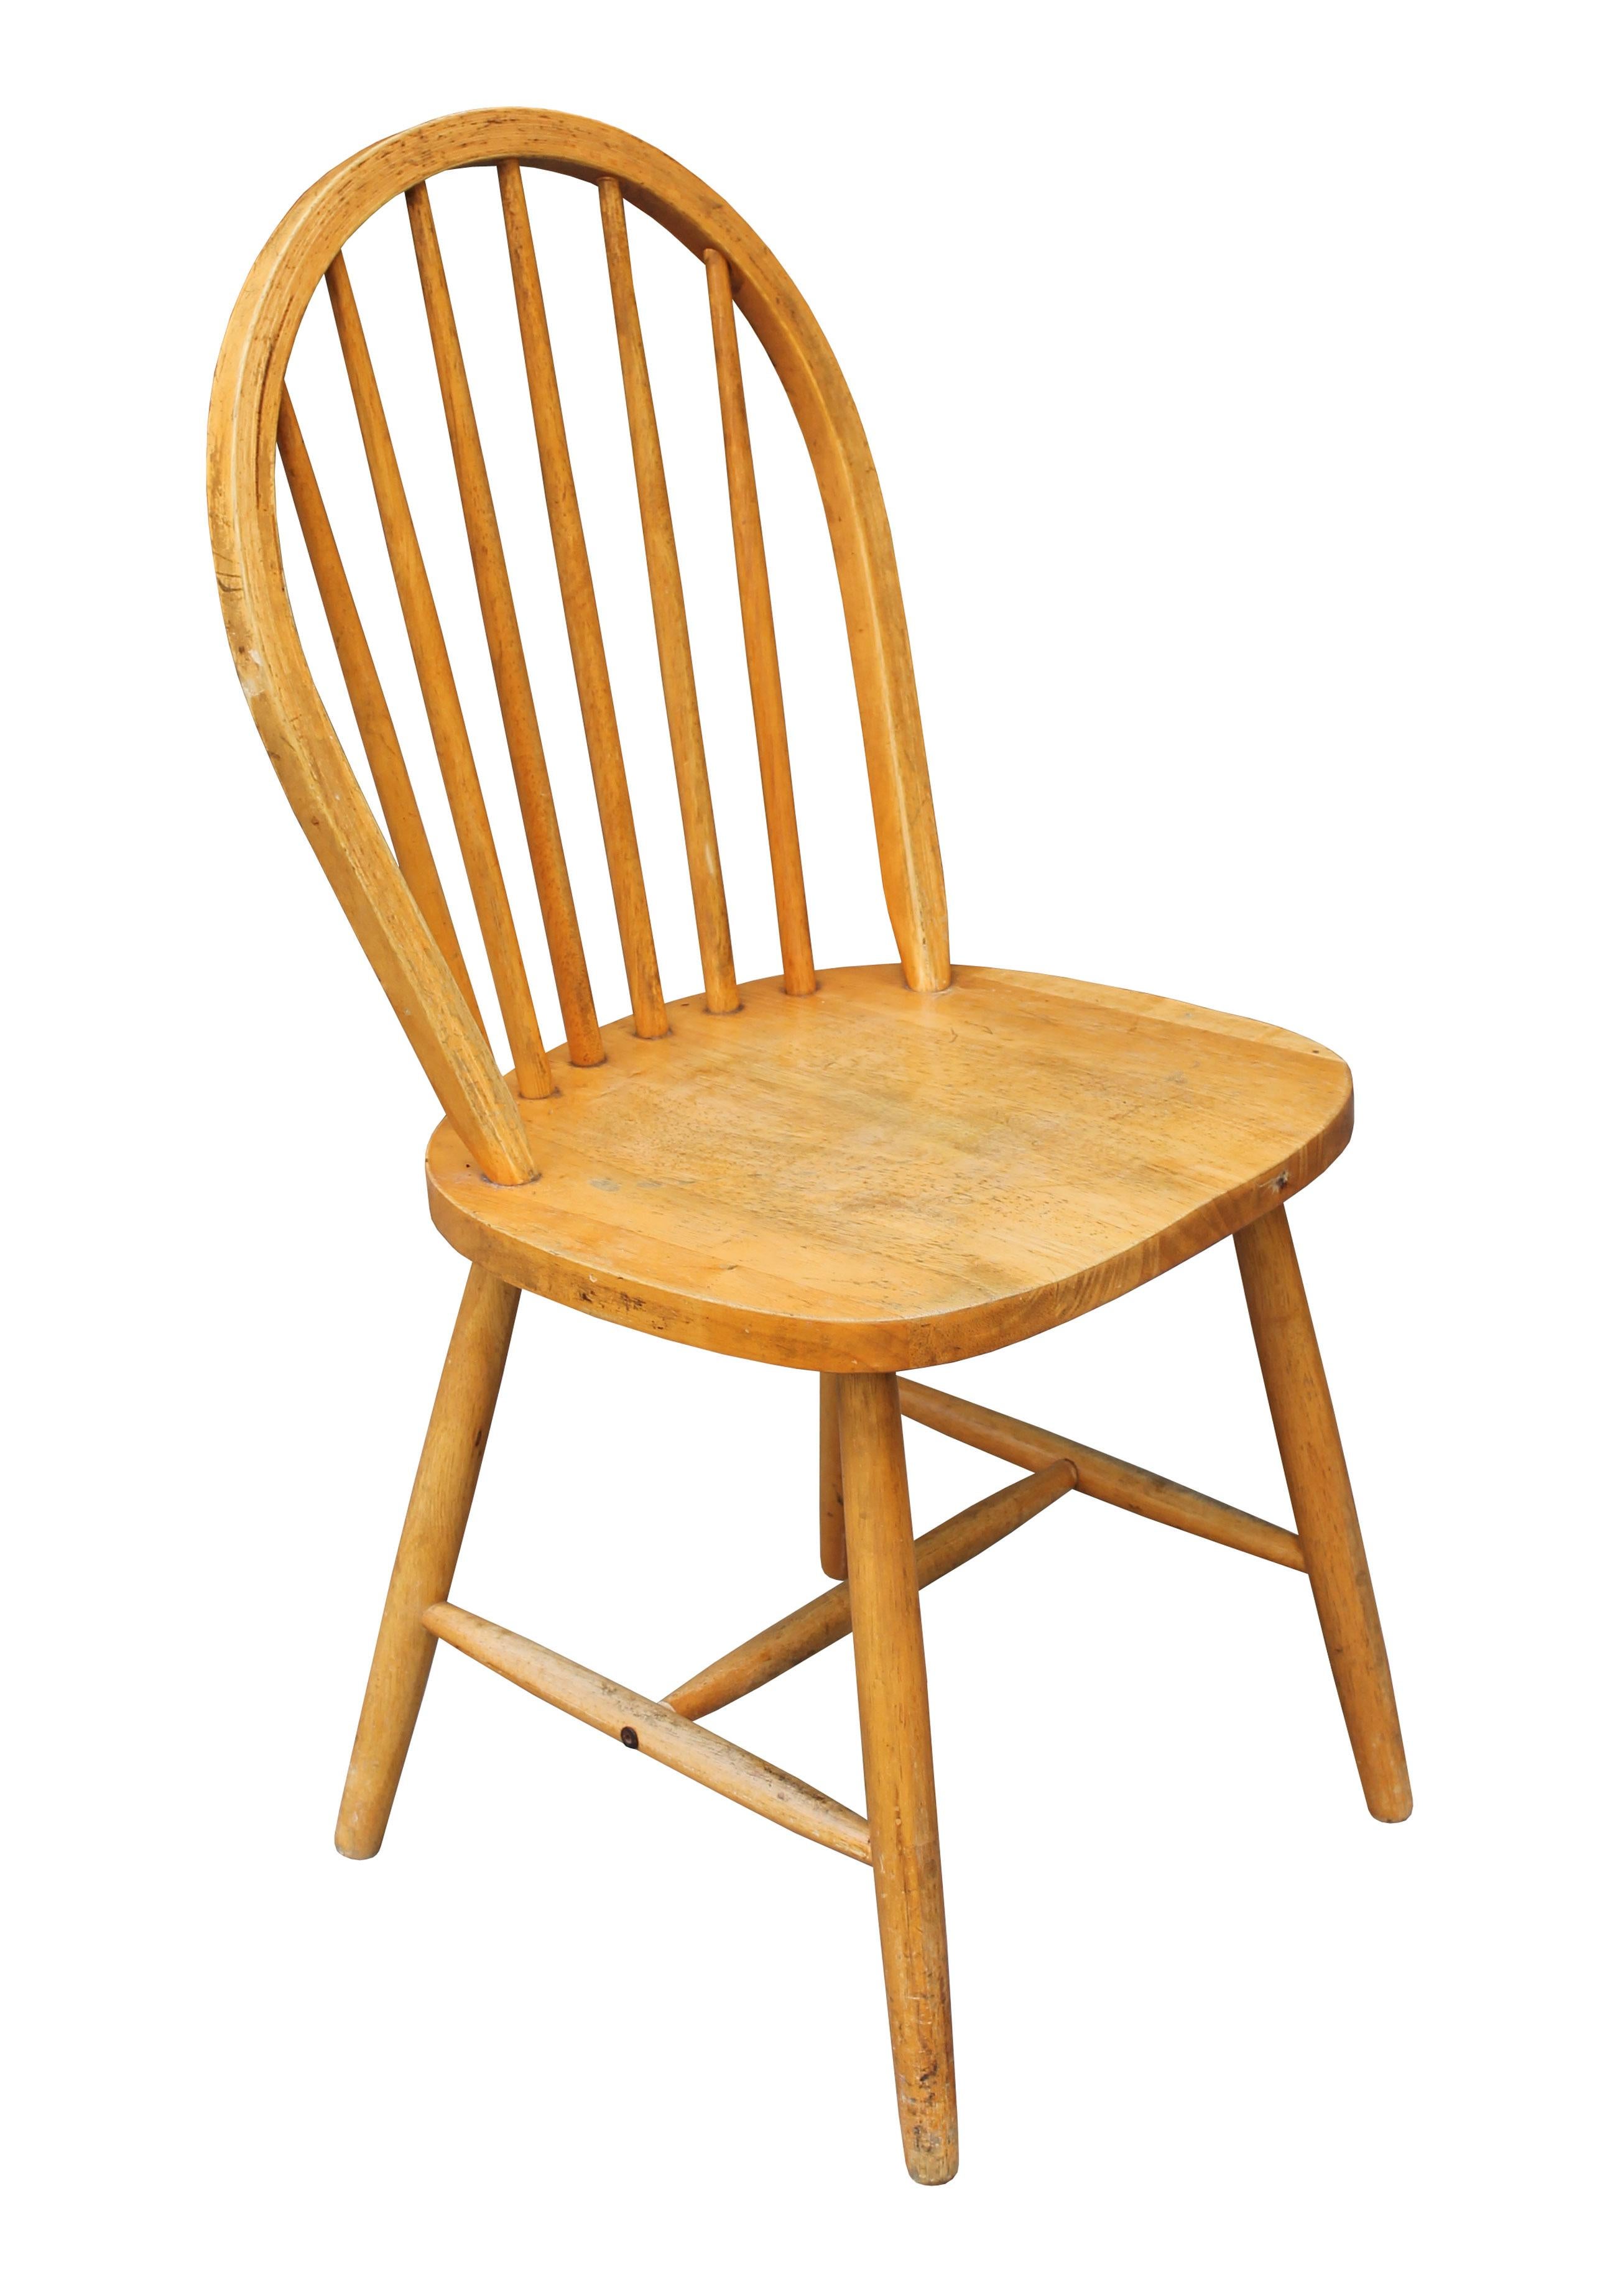 Two dining chairs designed after original Ercol Windsor Chairs Model 400. Both have the classic design with the steam bent back rail forming a clean lined profile. They also have the same tapered legs and tapered back rails and are extremely